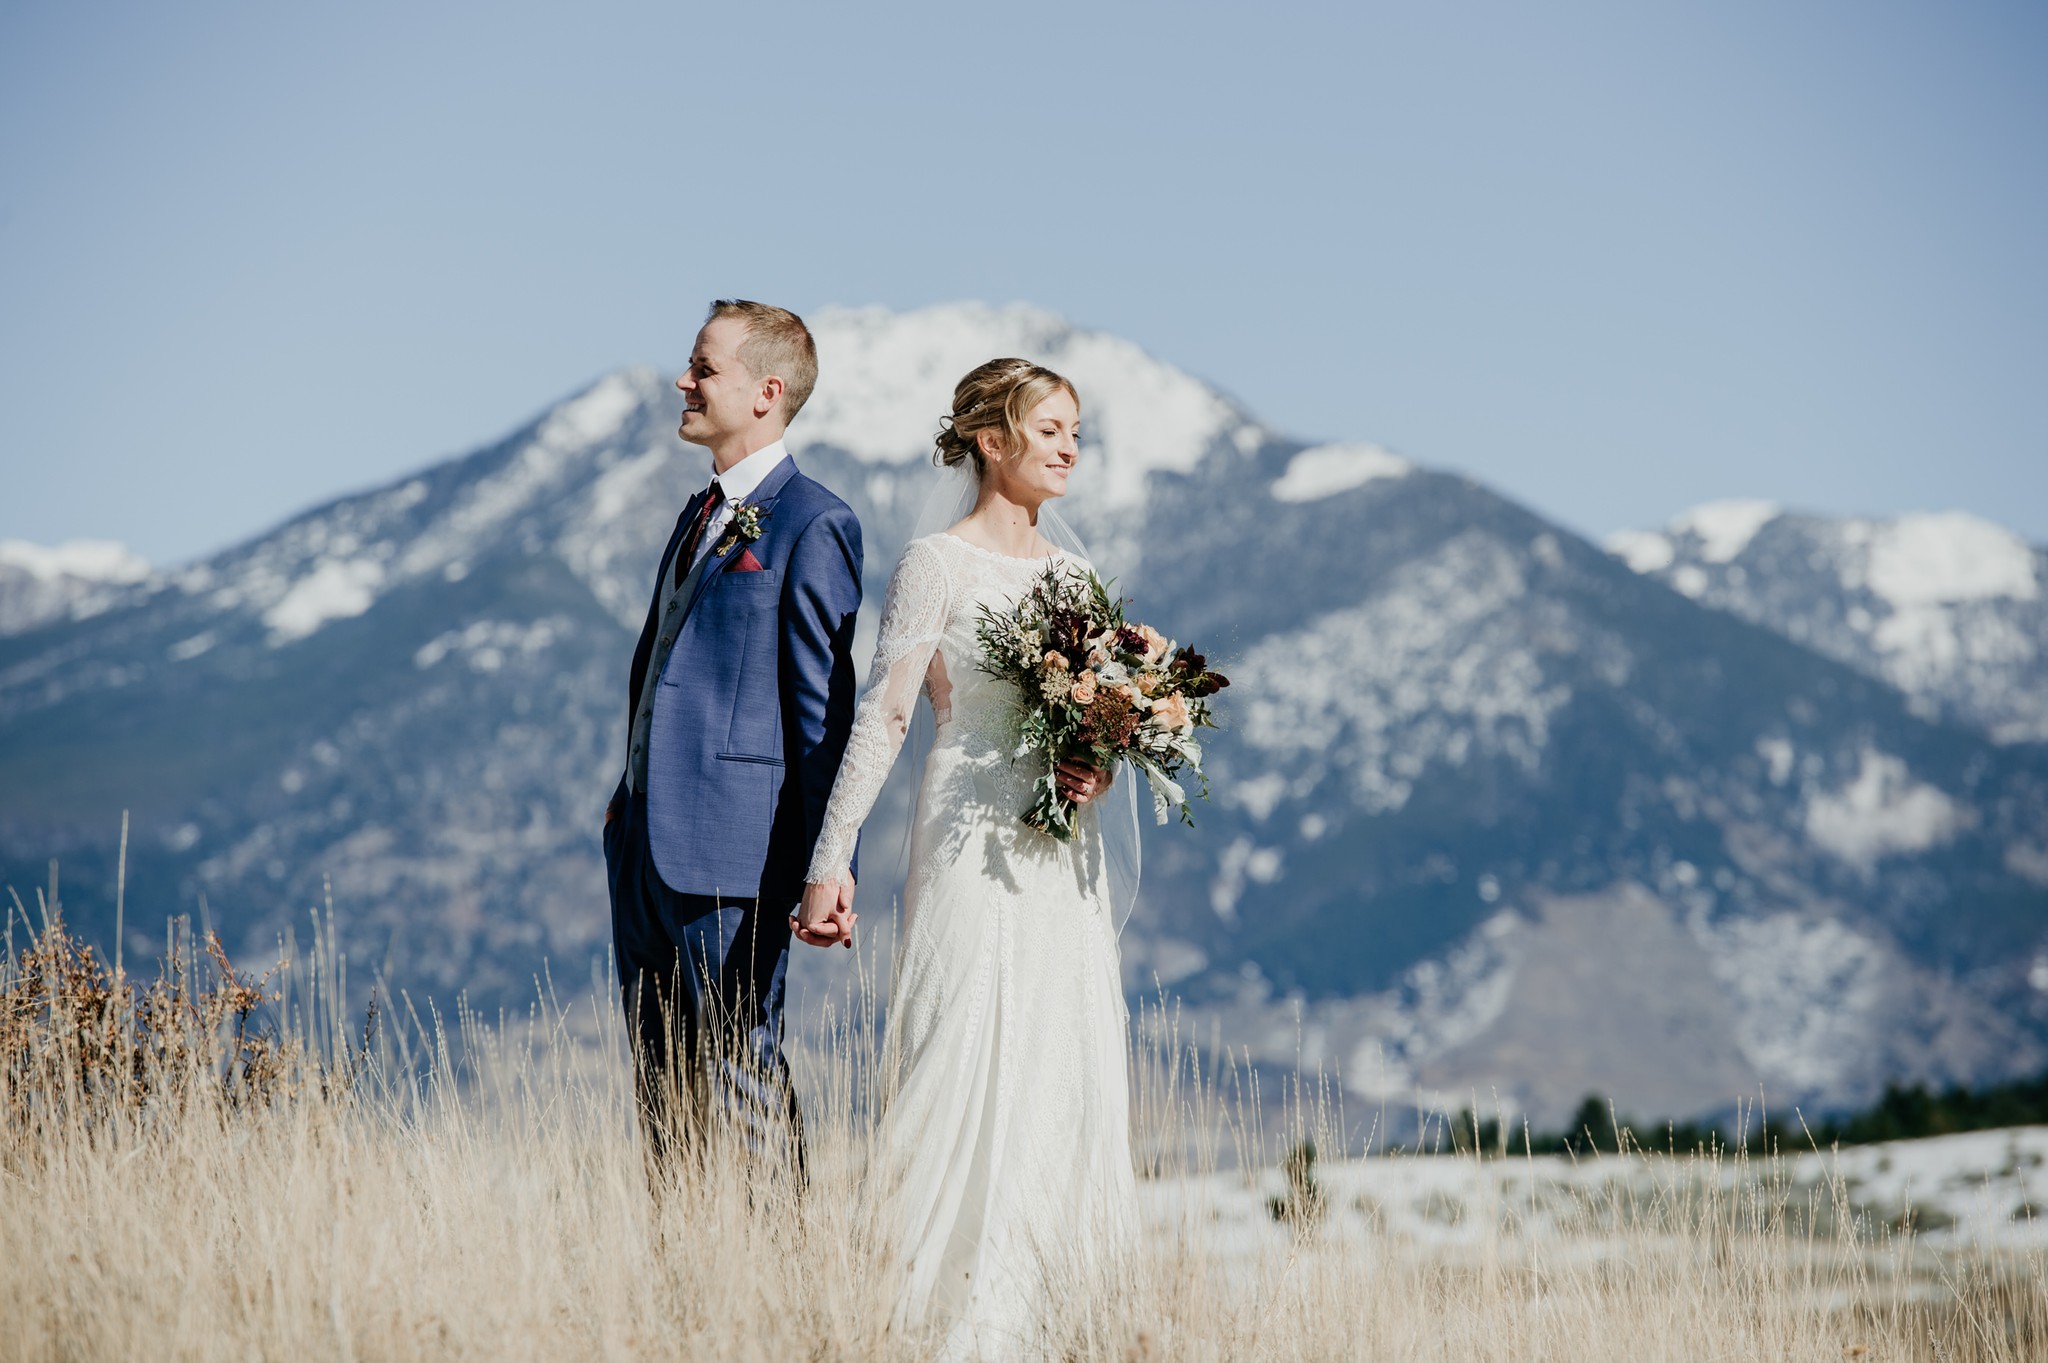 How to Plan A Spectacular Mountain Wedding From Top Wedding Pros